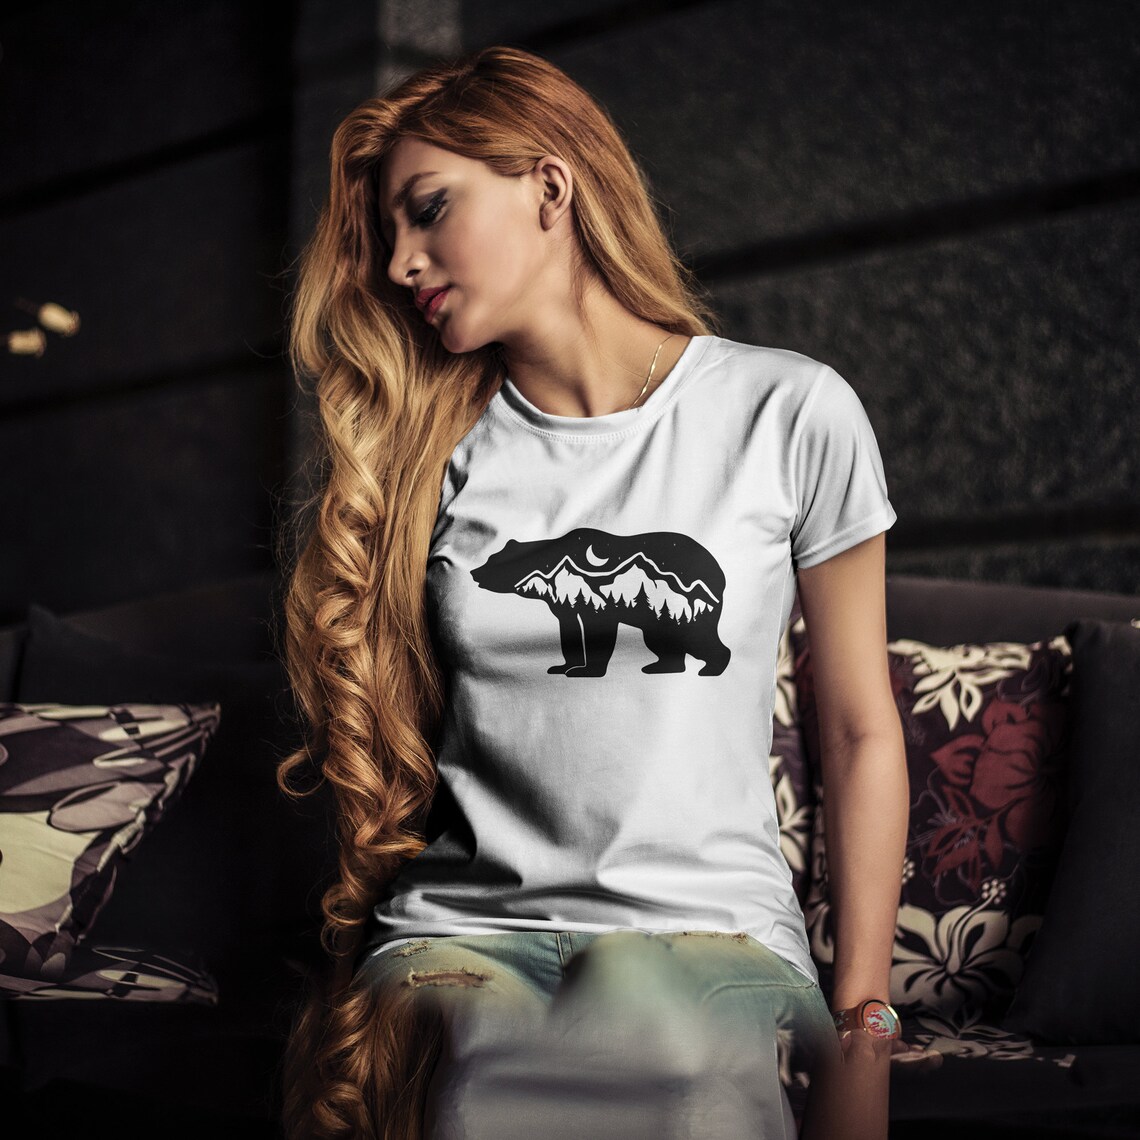 Woman sitting on a couch wearing a t - shirt with a bear on it.